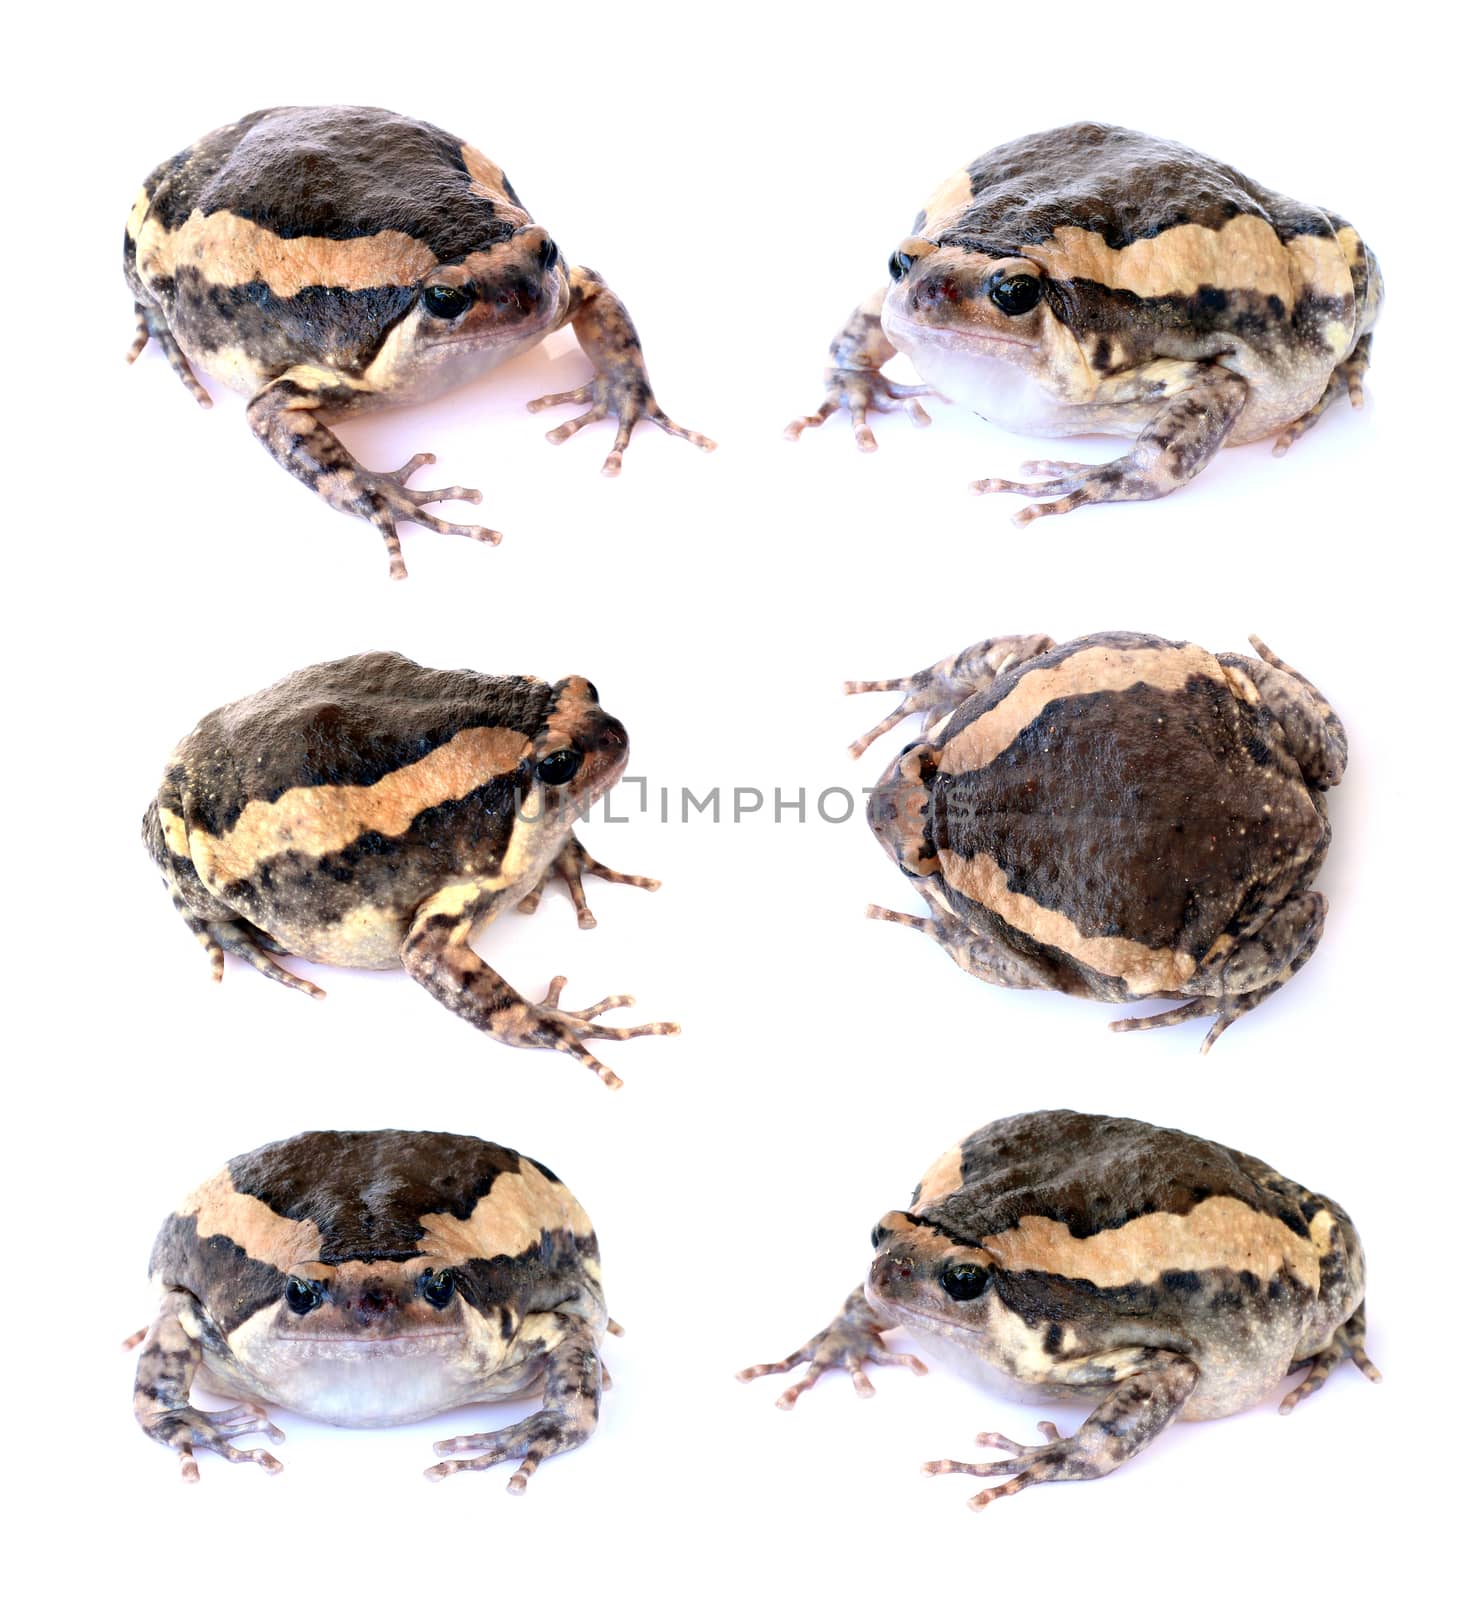 Bullfrog set isolate on a white background by yod67